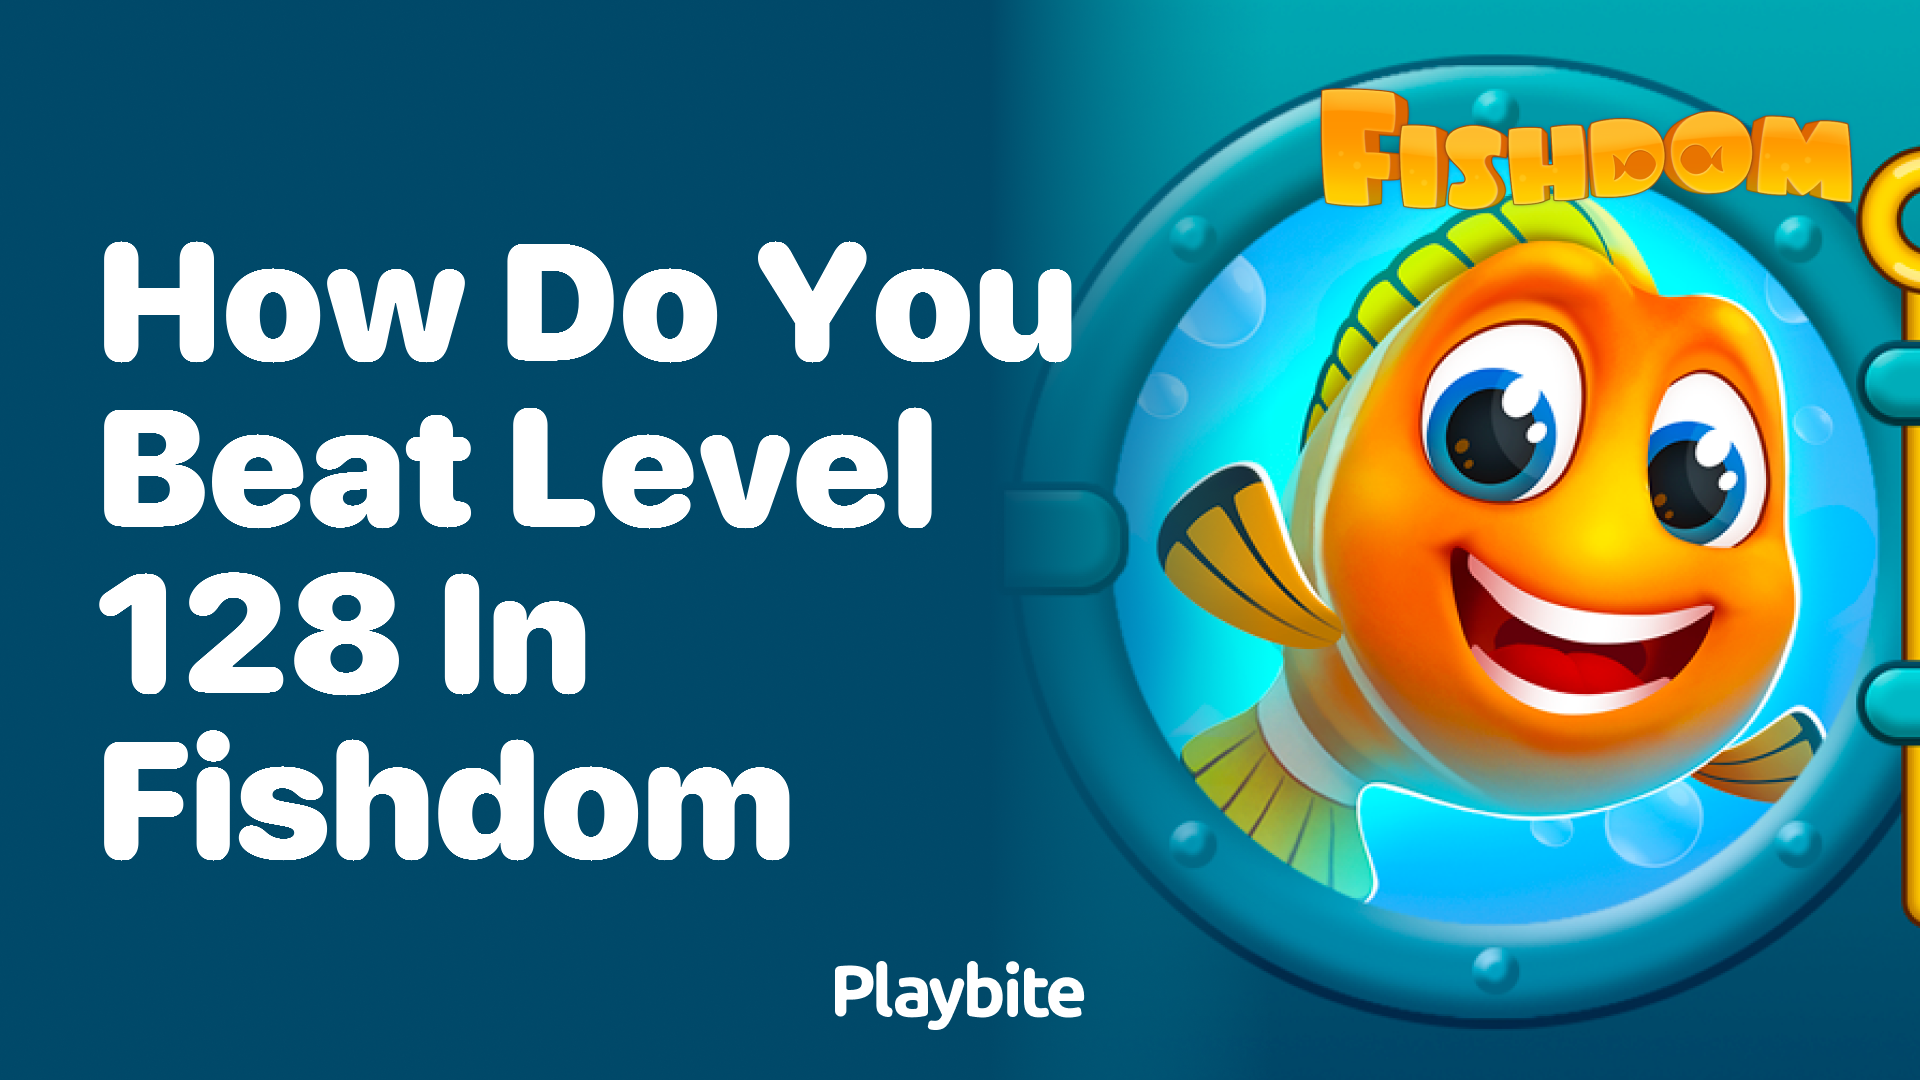 How Do You Beat Level 128 in Fishdom?